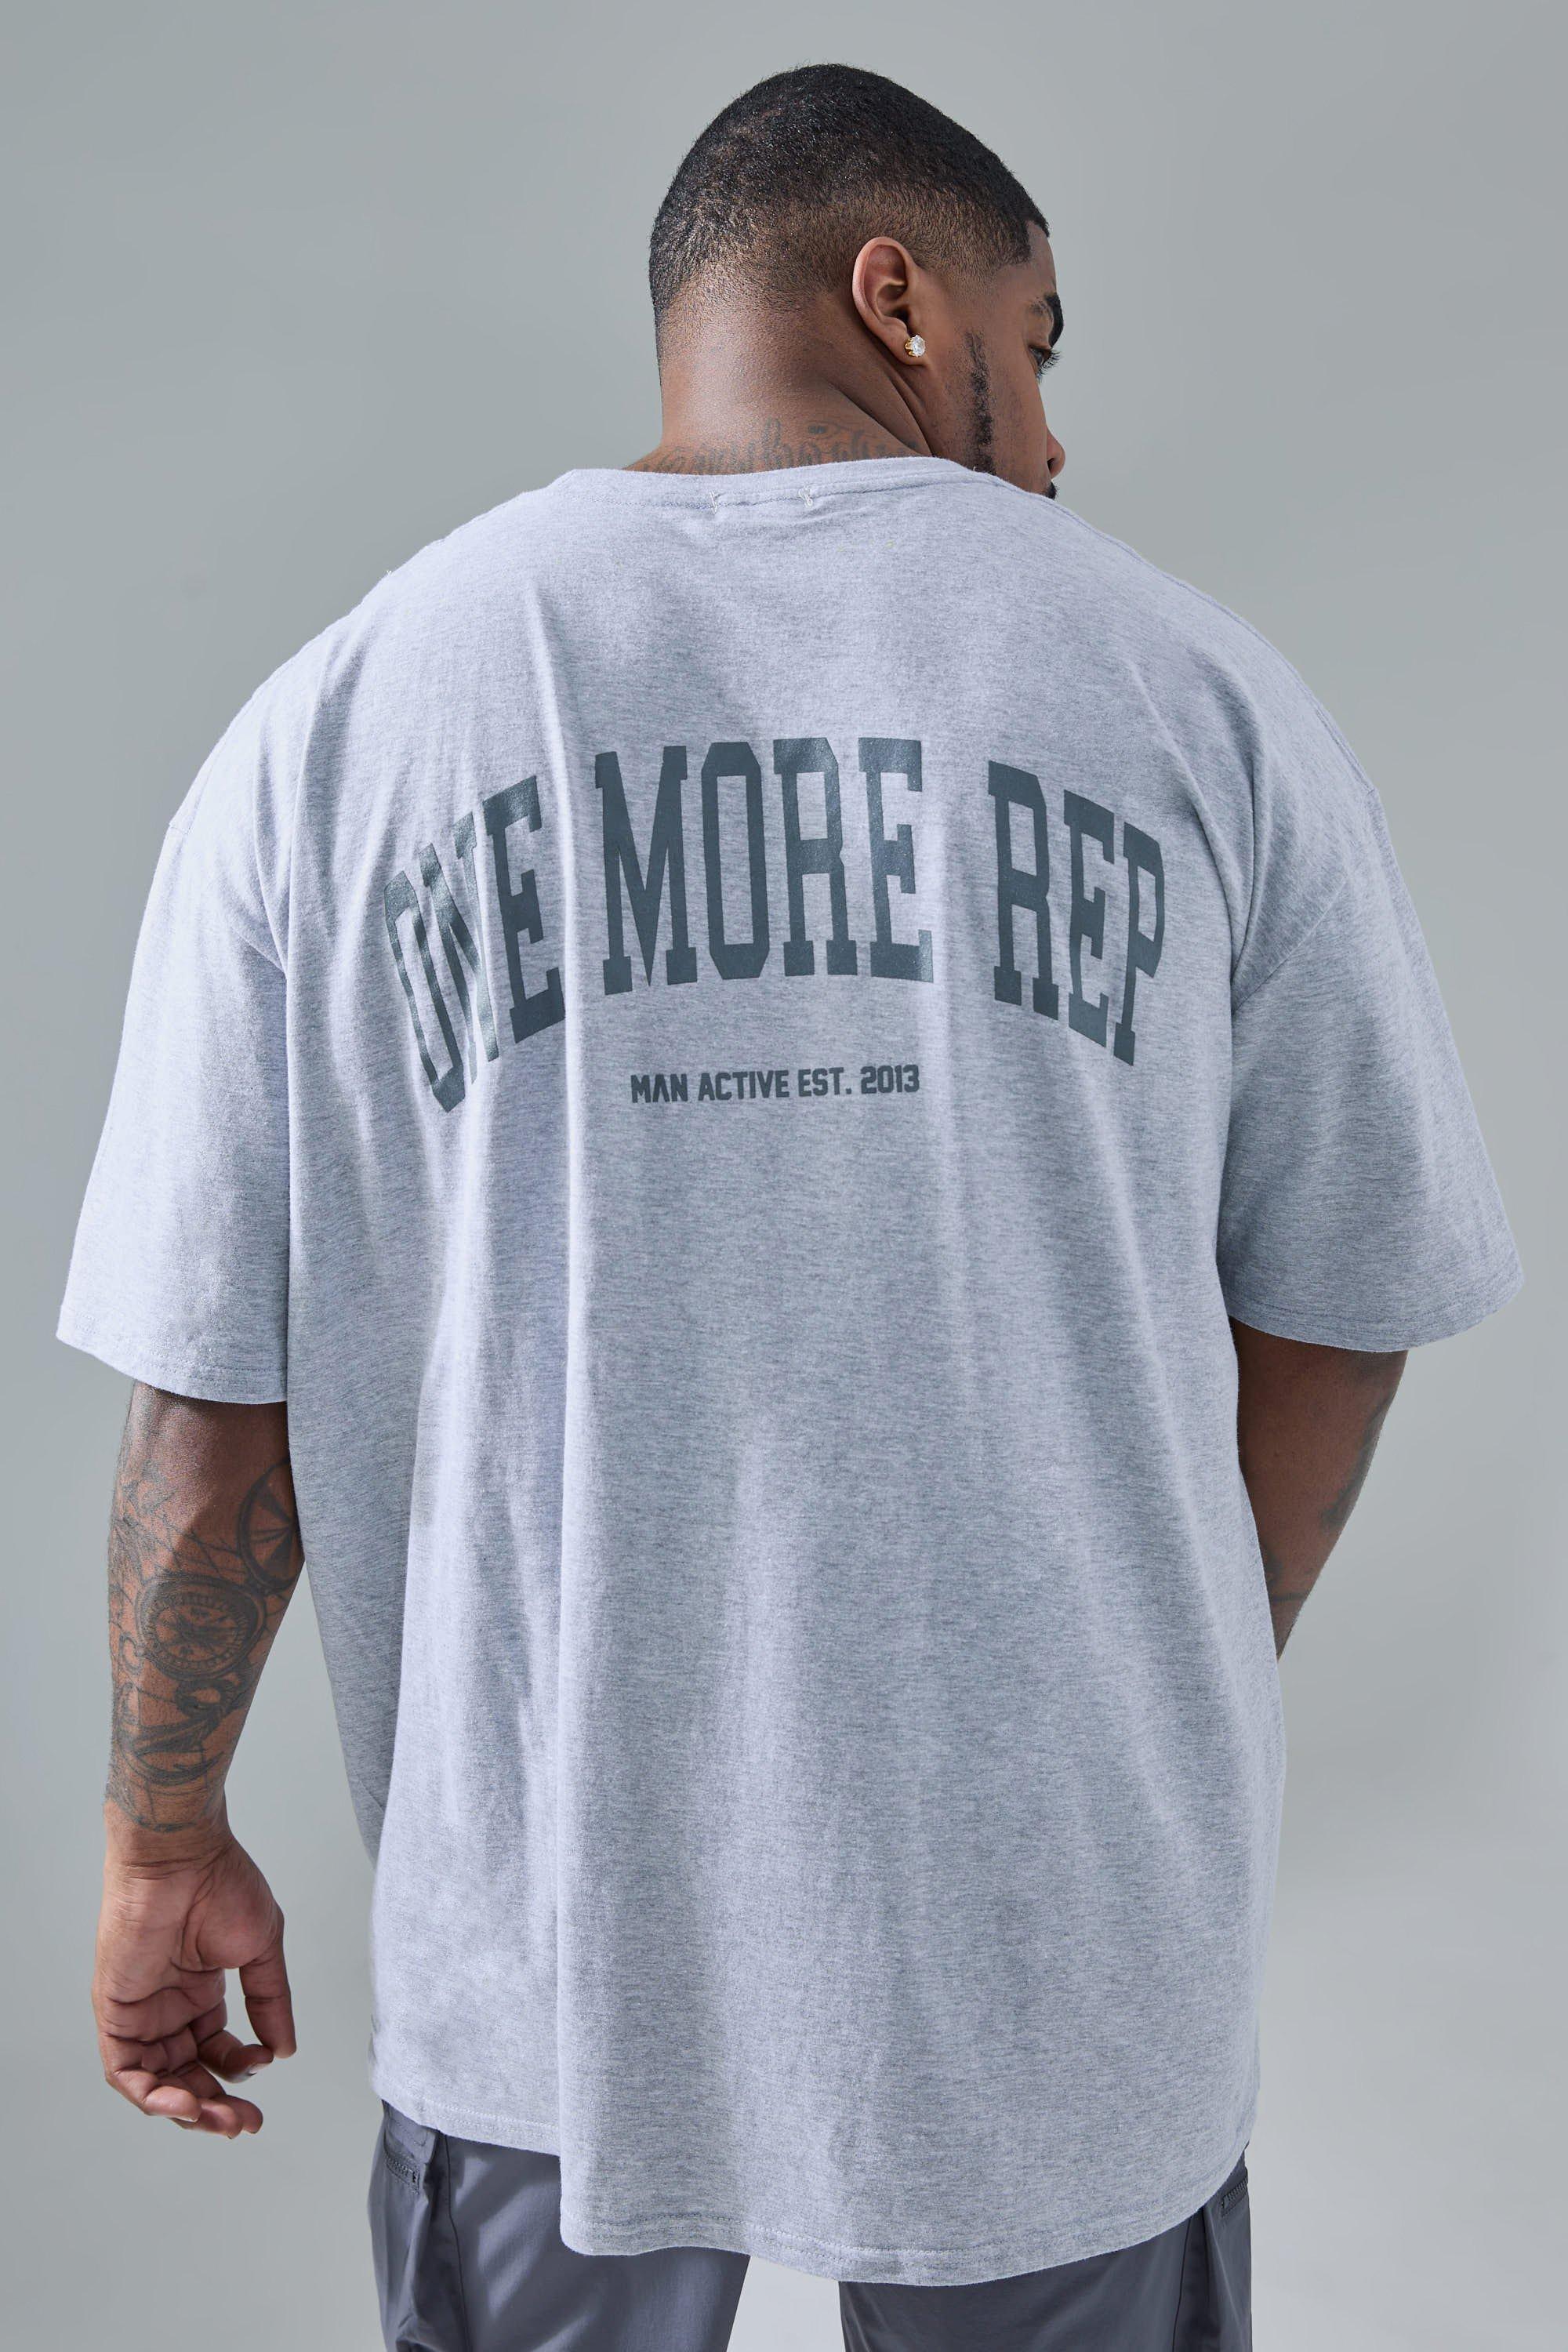 Image of Plus Man Active Oversized One More Rep T-shirt, Grigio